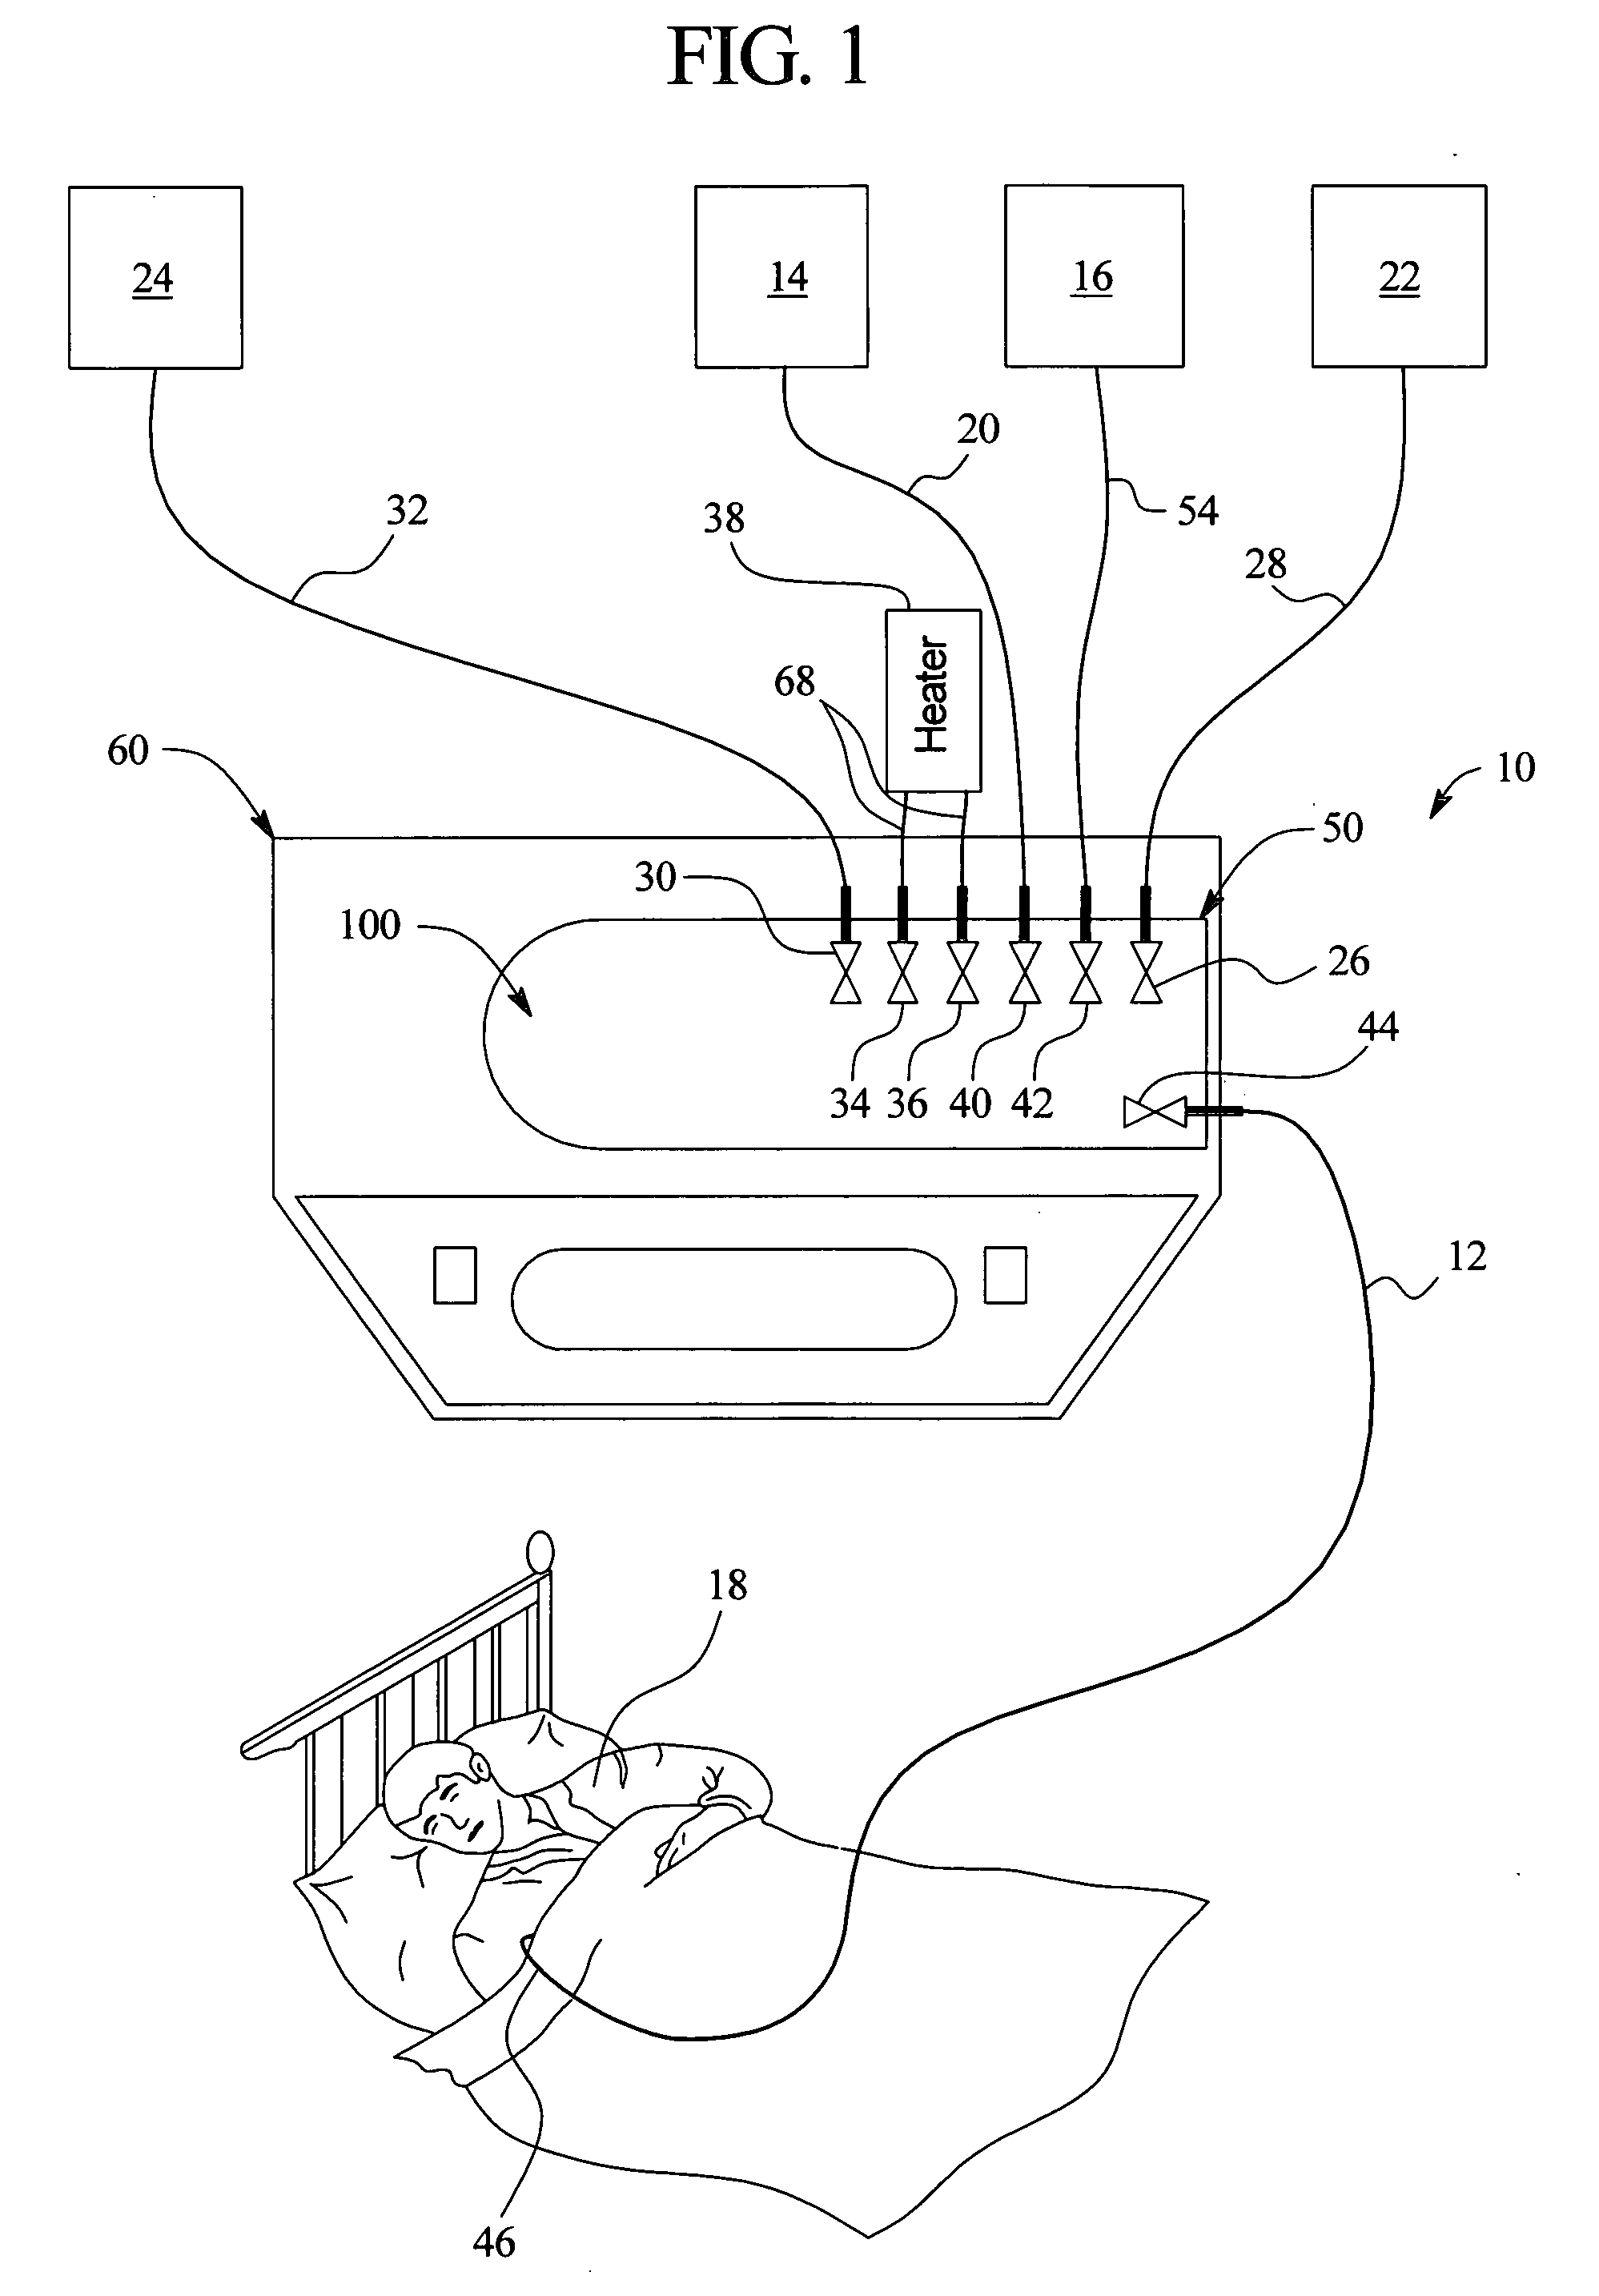 Cassette-based dialysis medical fluid therapy systems, apparatuses and methods